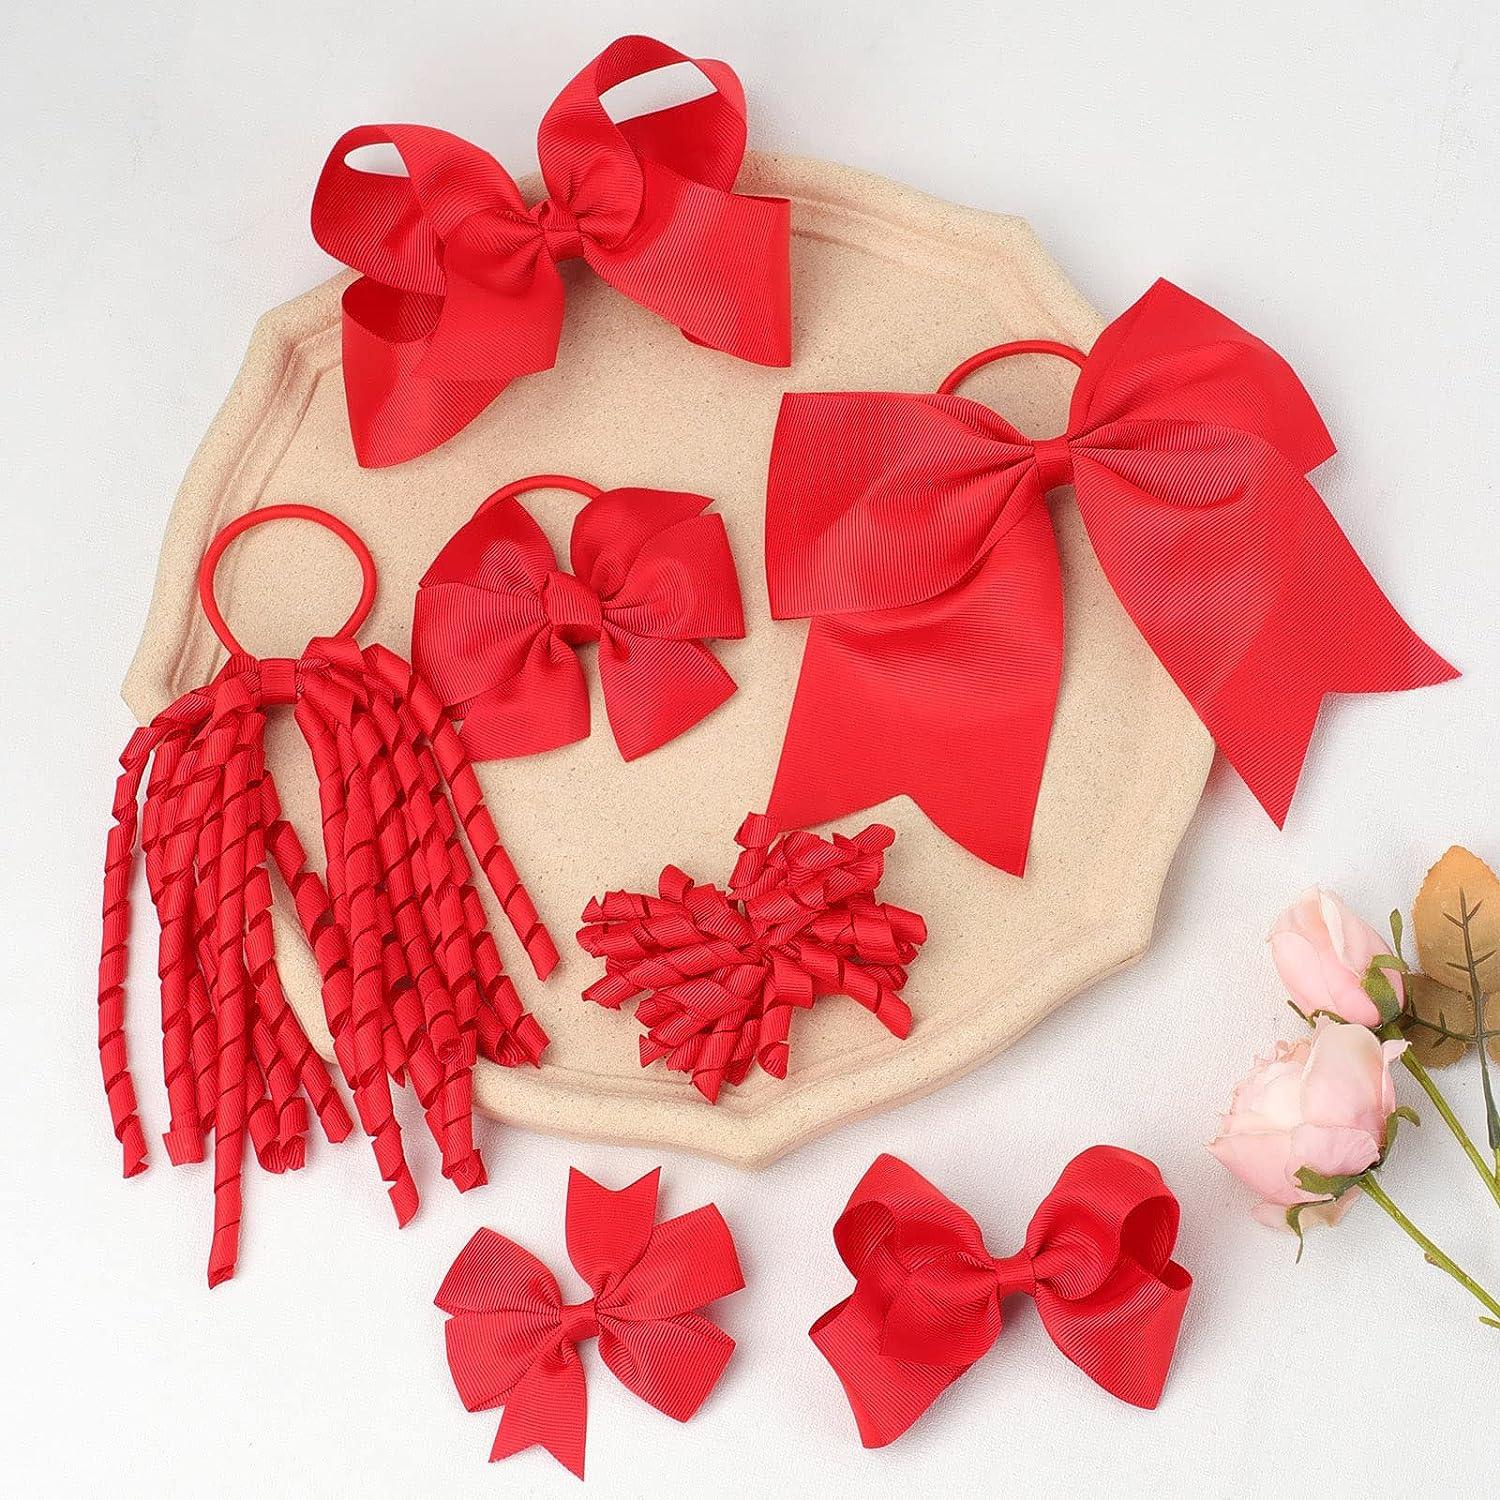 32PCS Red Bows for Girls Oaoleer Grosgrain Ribbon Red Hair Accessories Set  Include Hair Bows Cheer Bows Alligator Hair Clips Curly Koker Bows Bows Hair  Tie Hair Barrettes Headbands for Little Girls